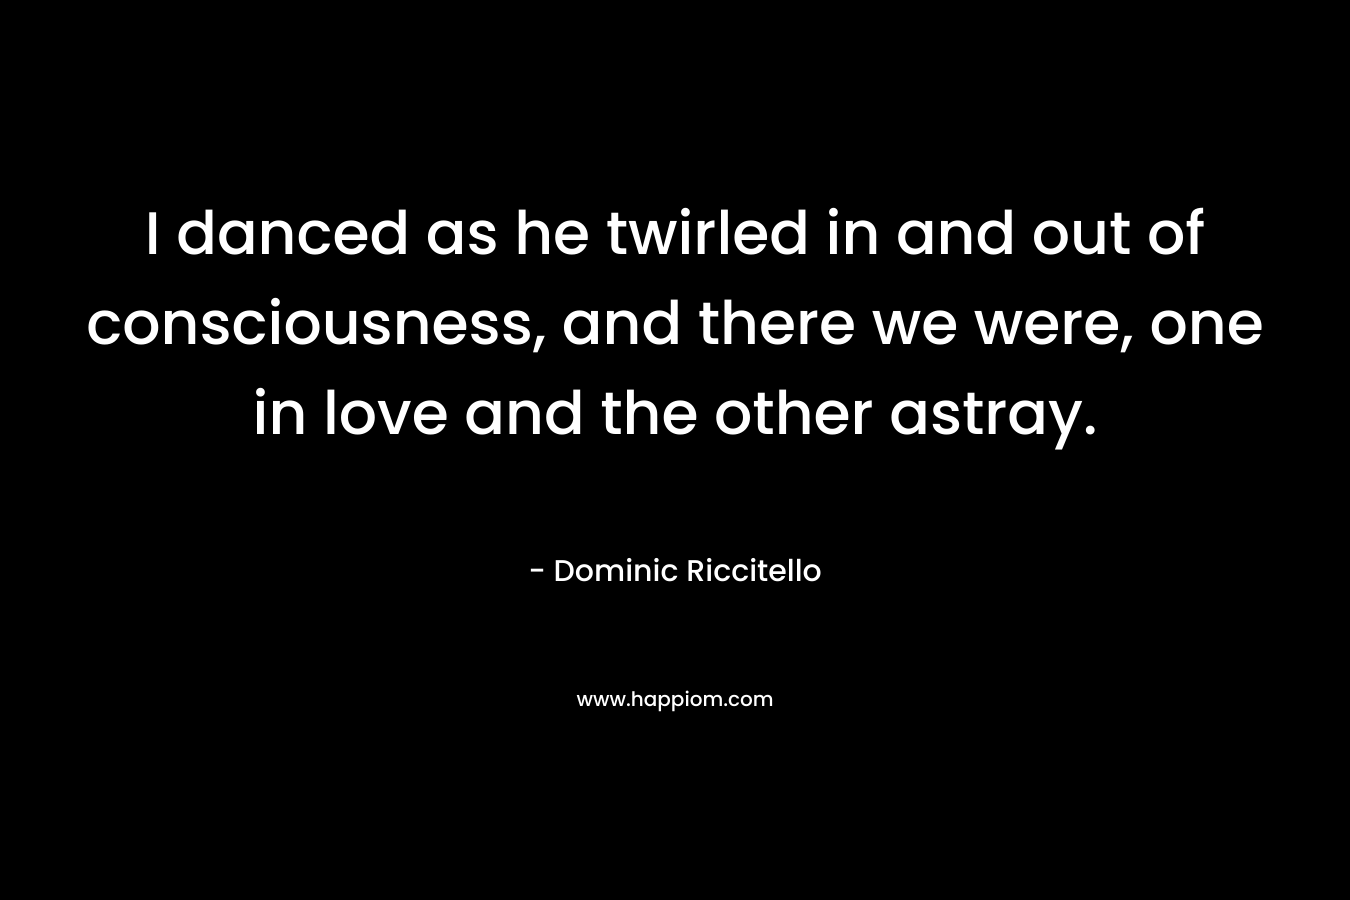 I danced as he twirled in and out of consciousness, and there we were, one in love and the other astray. – Dominic Riccitello